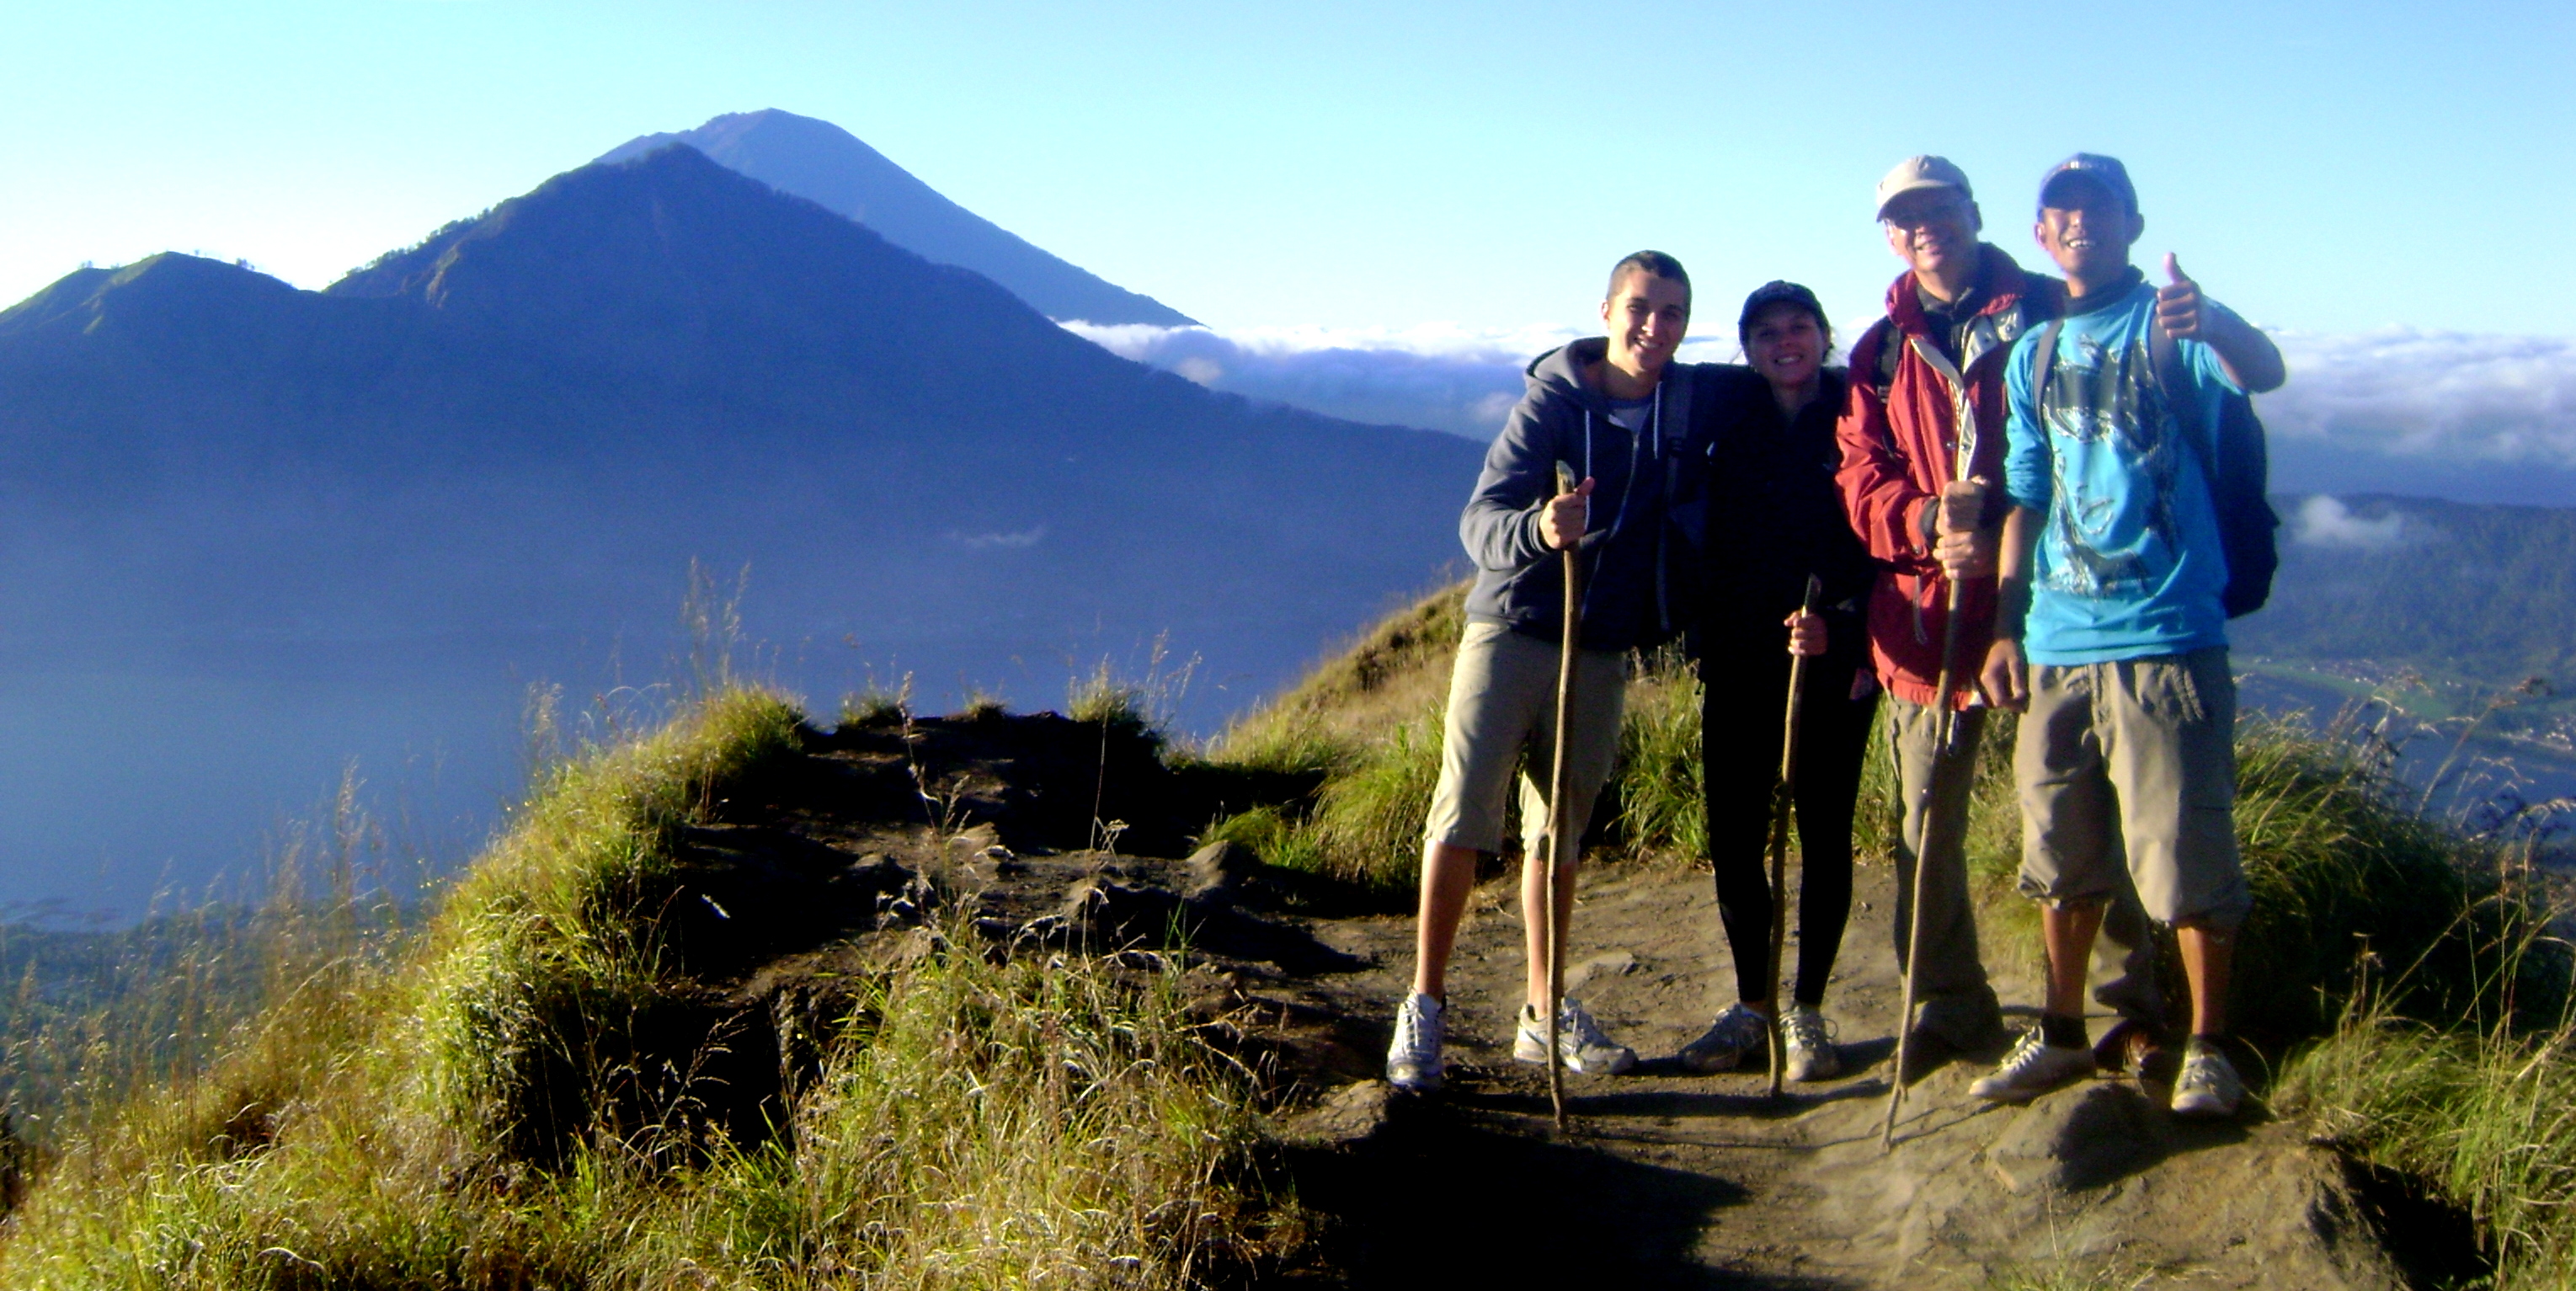 Climbing Mt. Batur with your wolfpack